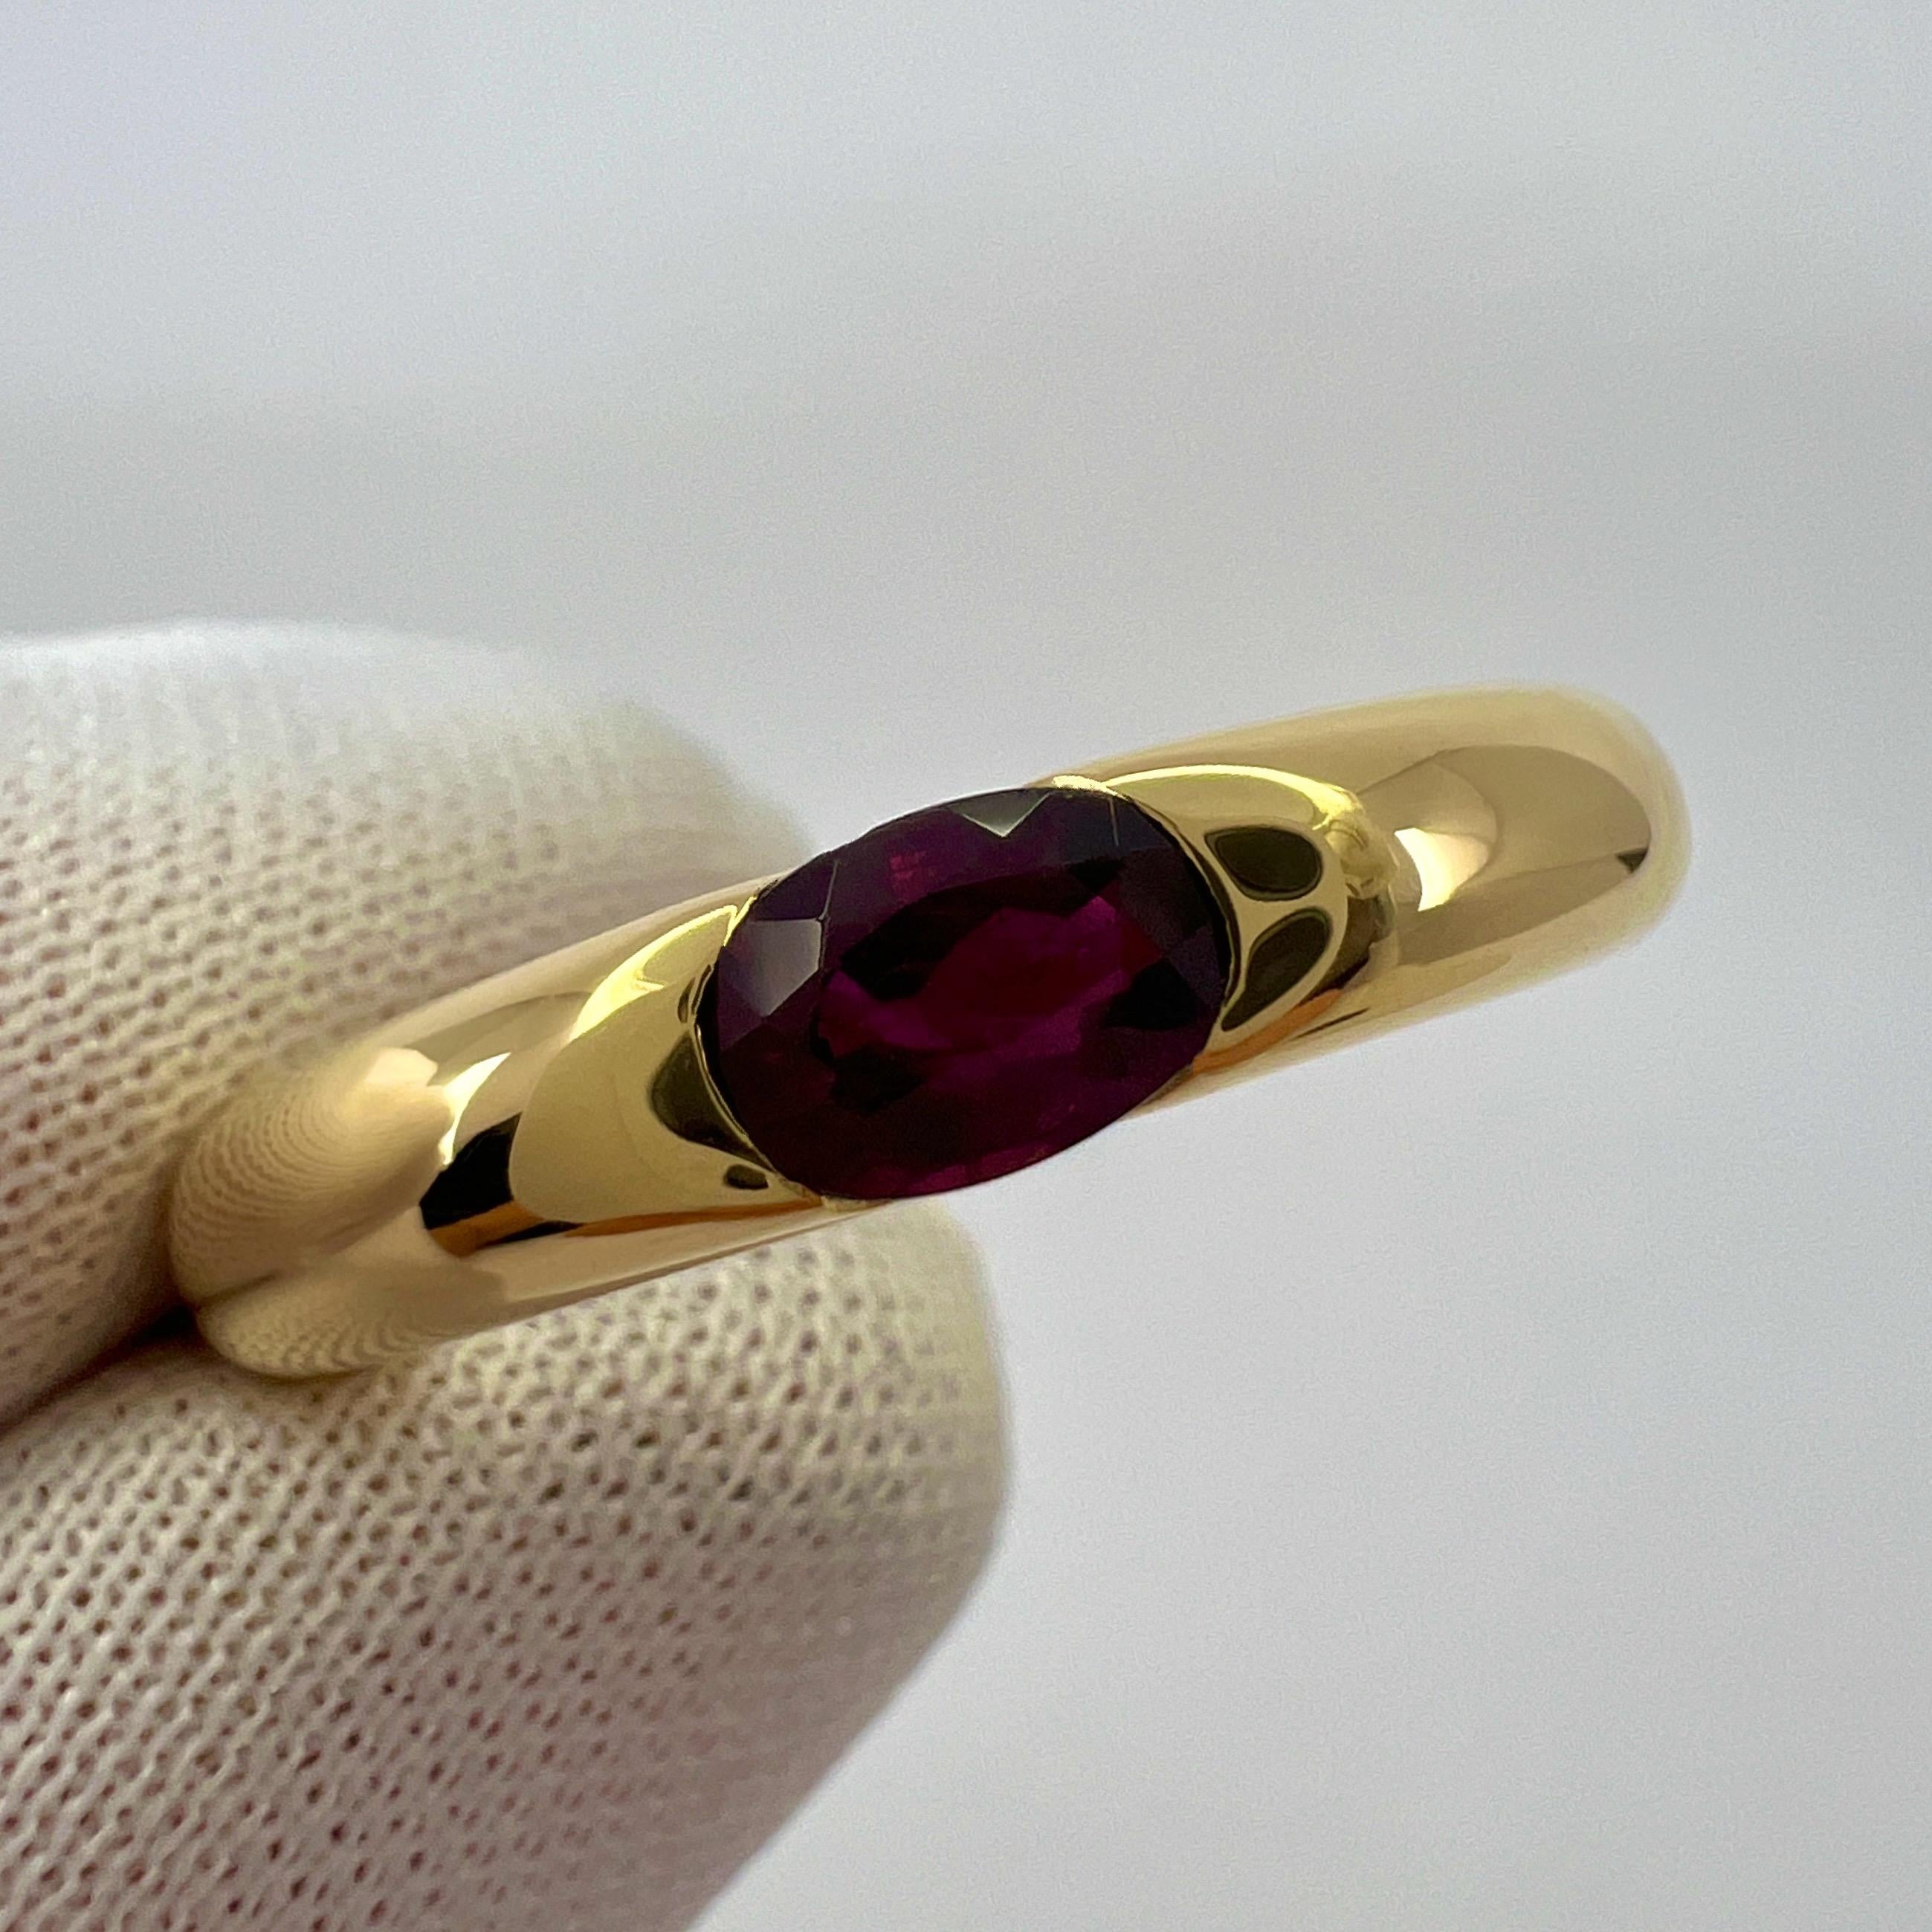 Vintage Cartier Deep Red Ruby Ellipse 18k Yellow Gold Oval Solitaire Ring 50 US5 2